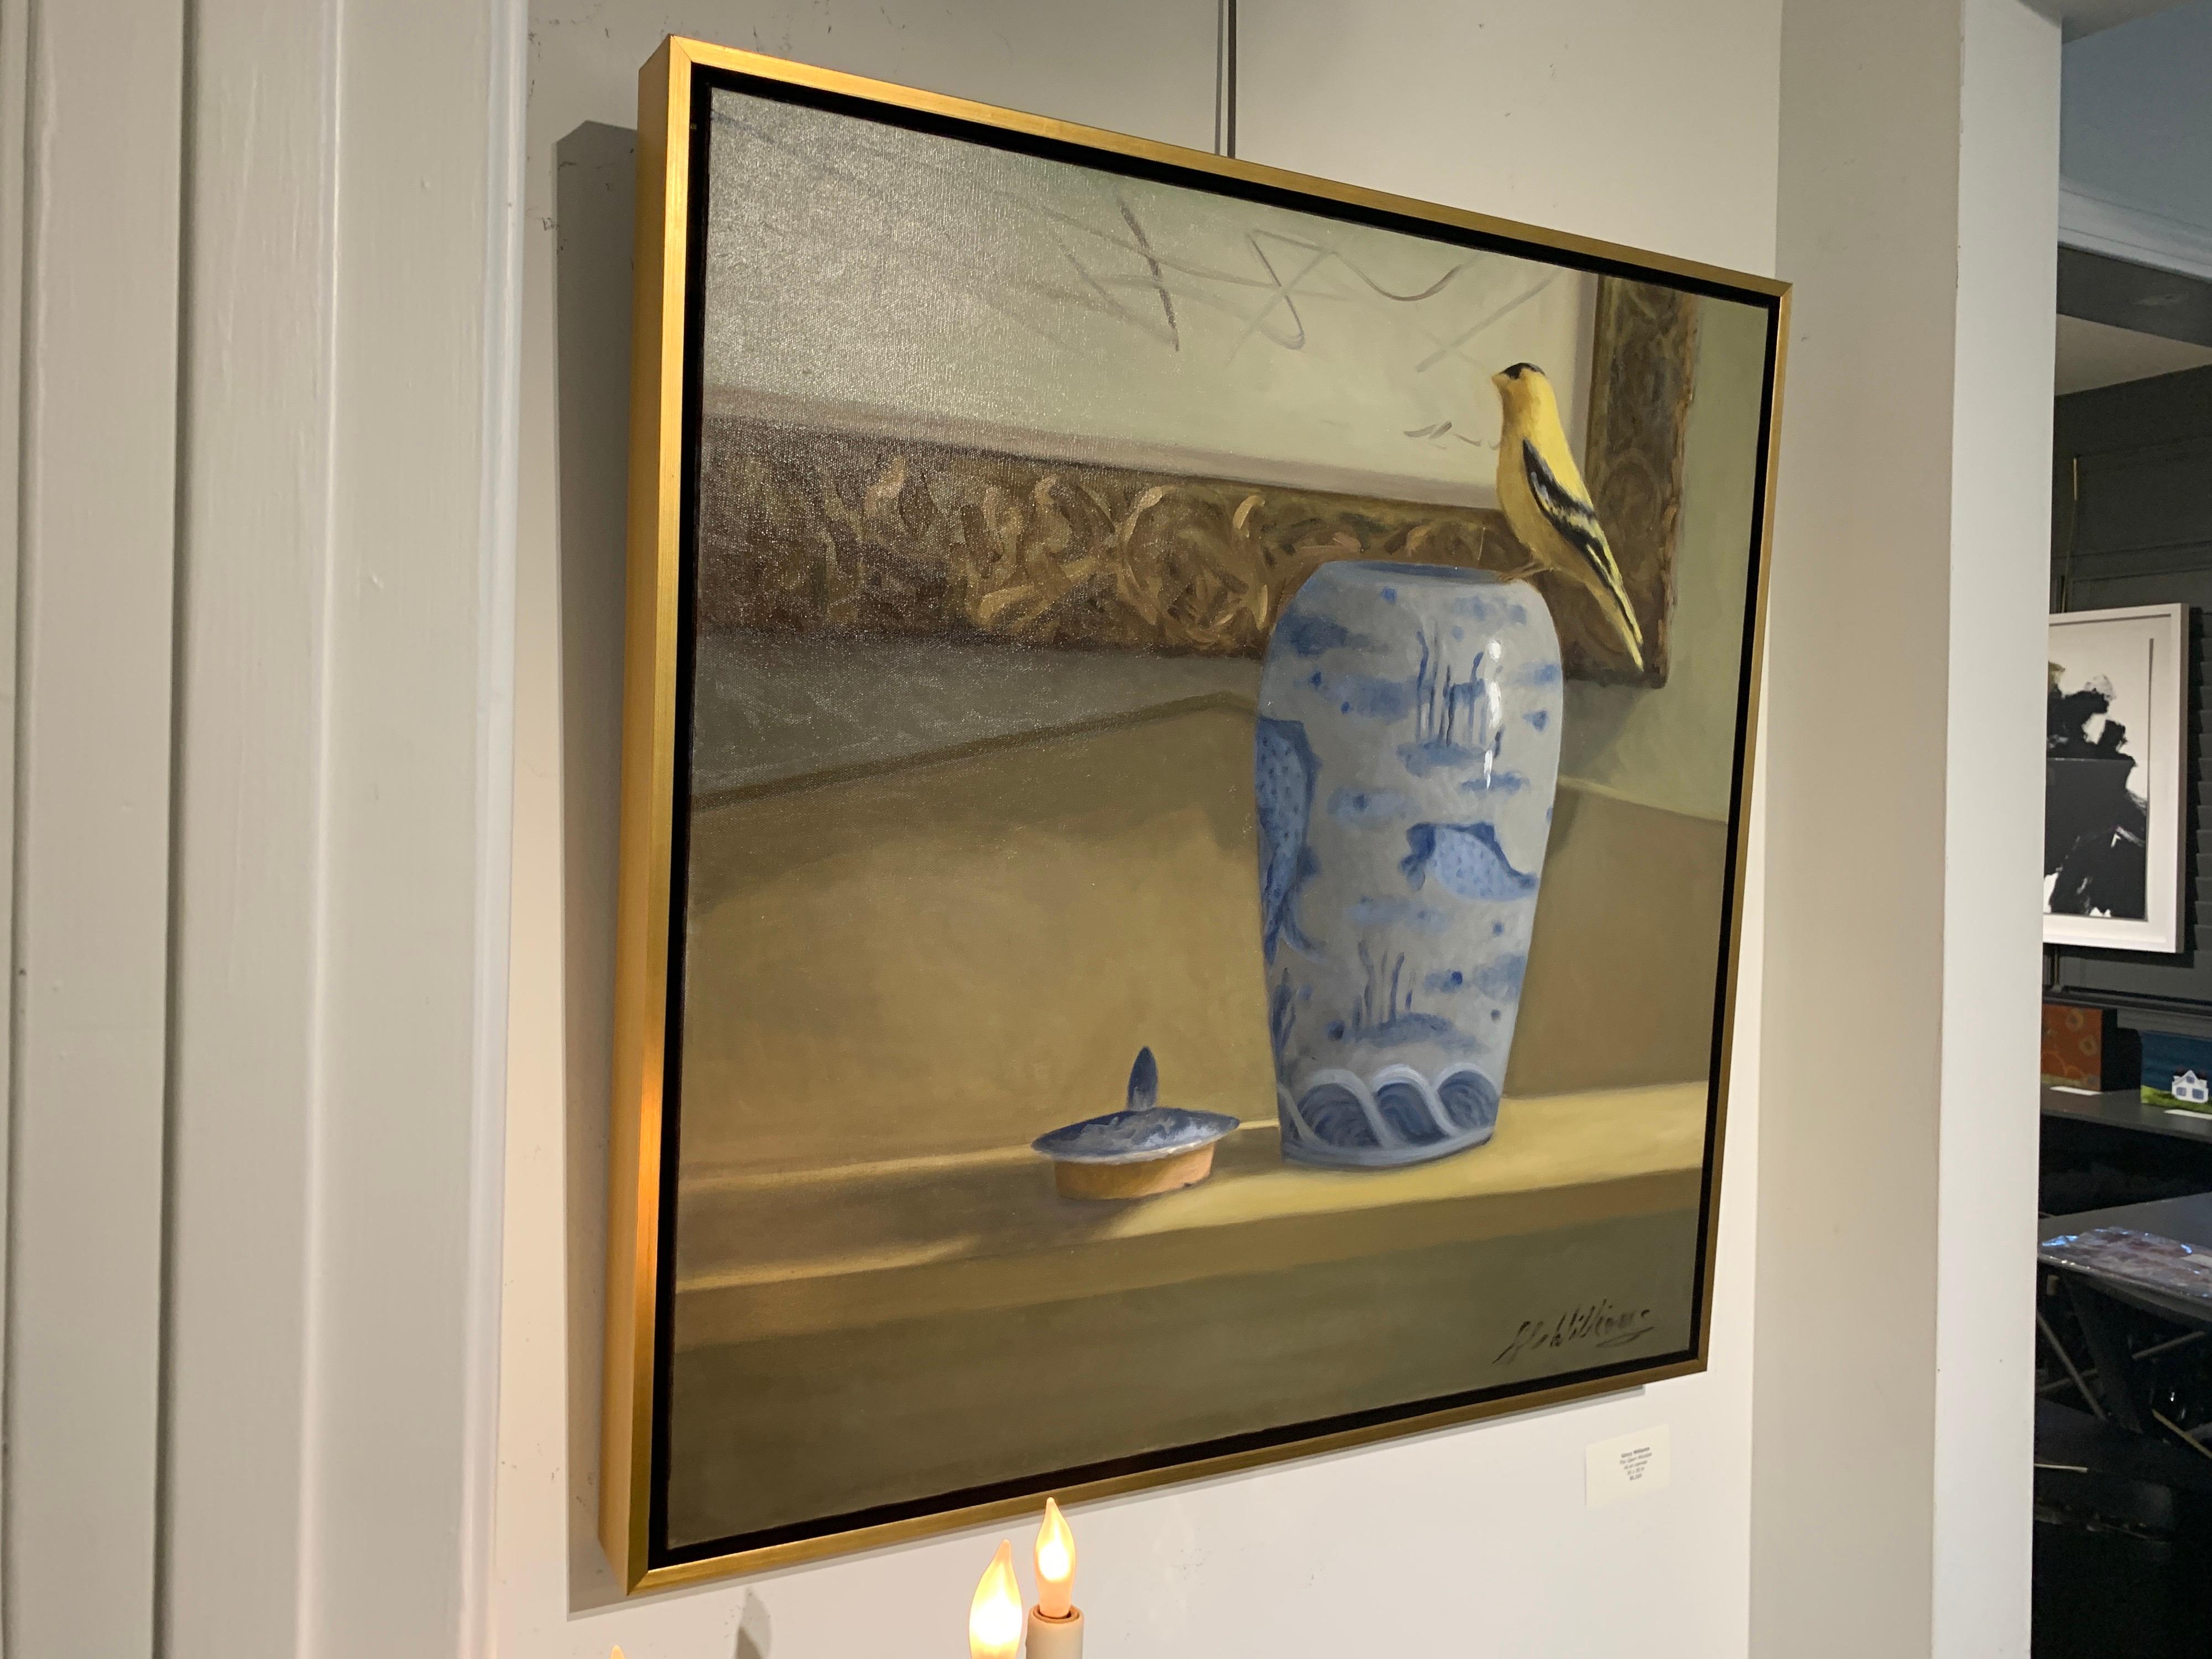 'The Open Window' is a framed oil on linen painting created by American artist Ginny Williams in 2020. This exquisite piece features a still-life that is not without reminiscing of 17th century paintings of Flanders and Holland, with a modern twist.